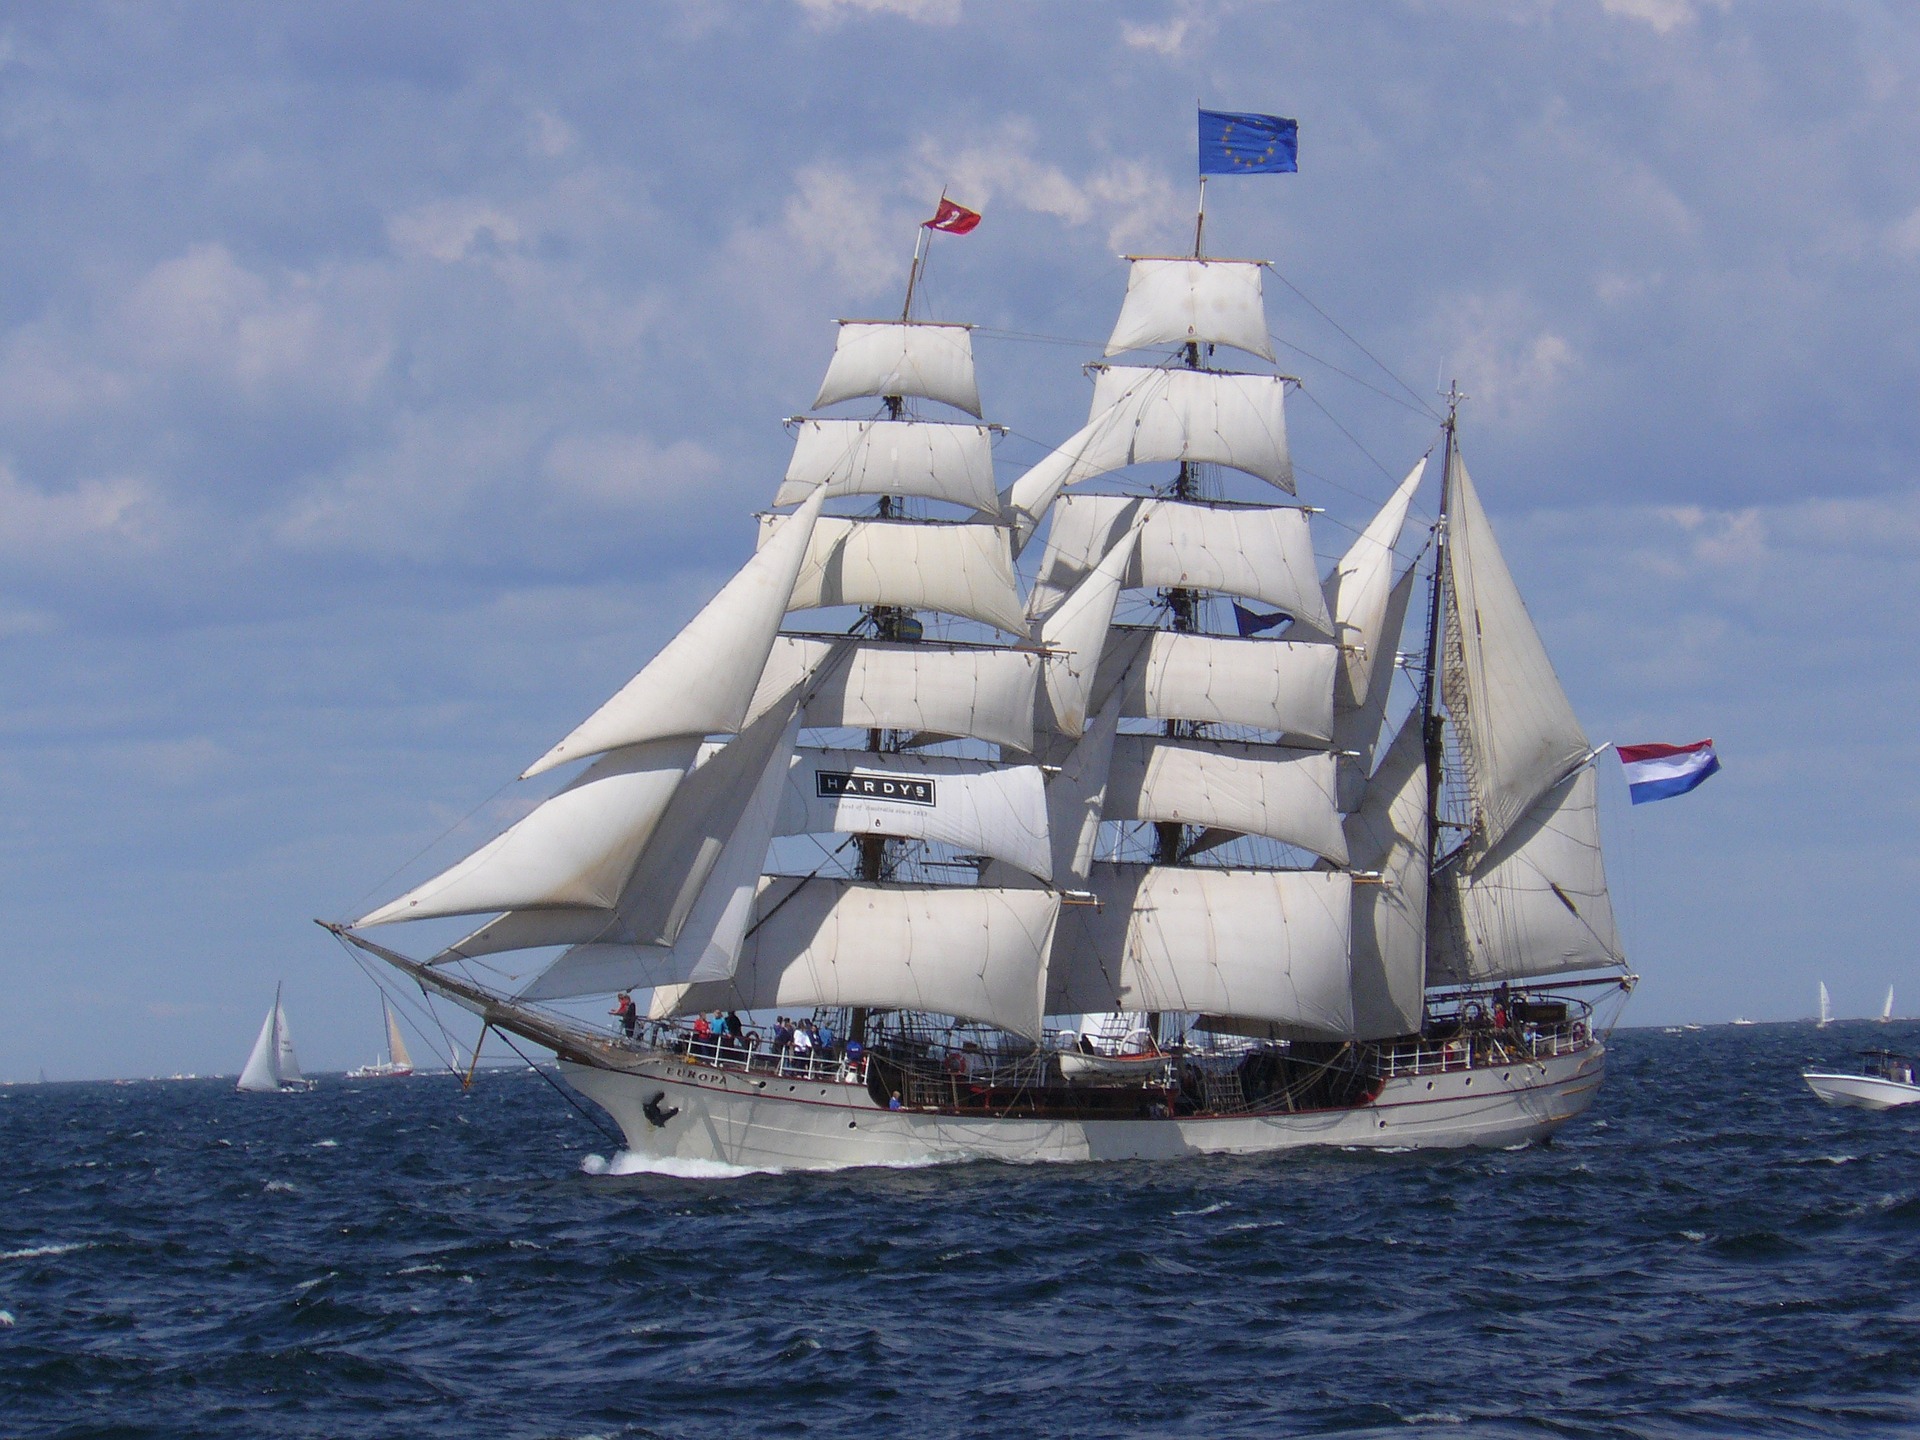 Peterson sponsors Sail Den Helder - Tall ship races in The Netherlands